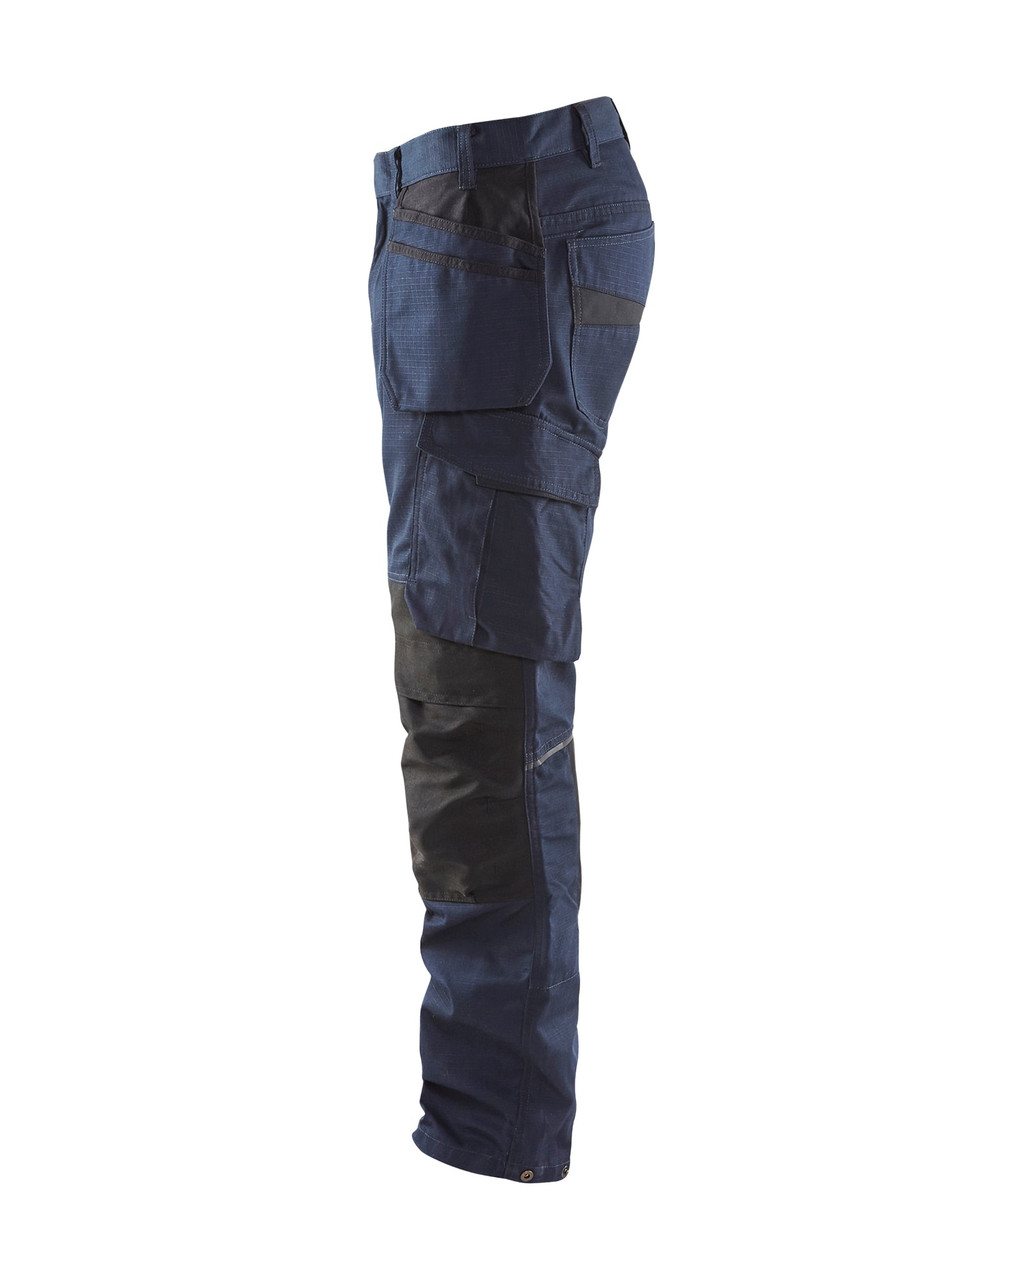 BLAKLADER Rip-Stop with Stretch Dark Navy Blue Trousers for Electricians that have Kneepad Pockets  available in Australia and New Zealand